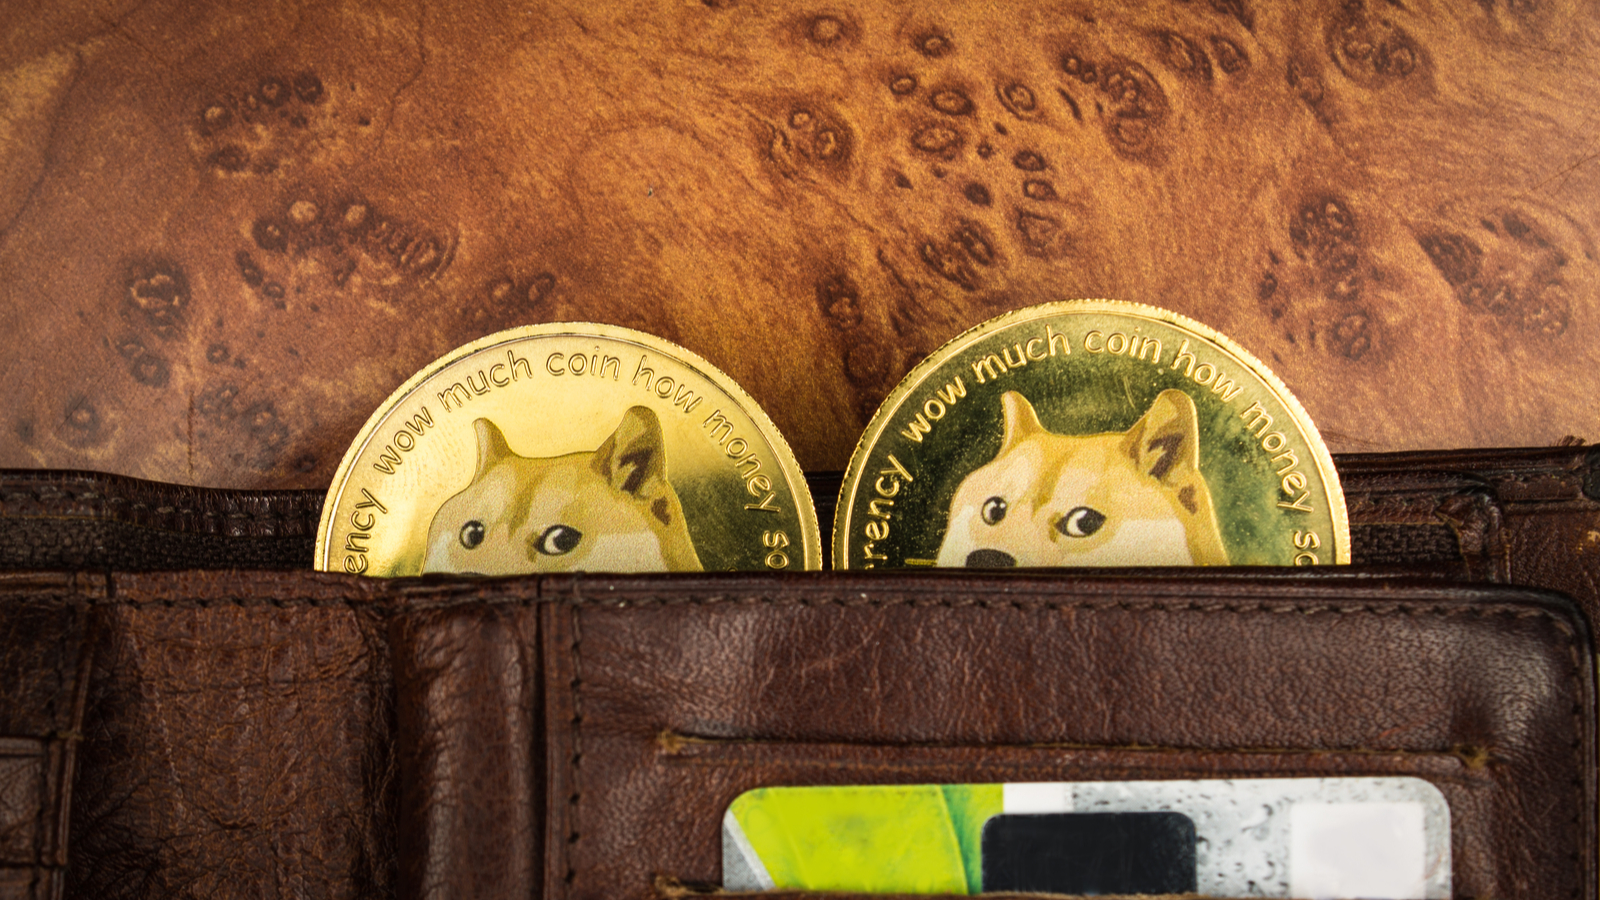 Dogecoin coins with doge faces peeking out of brown leather wallet. The coins have the words 